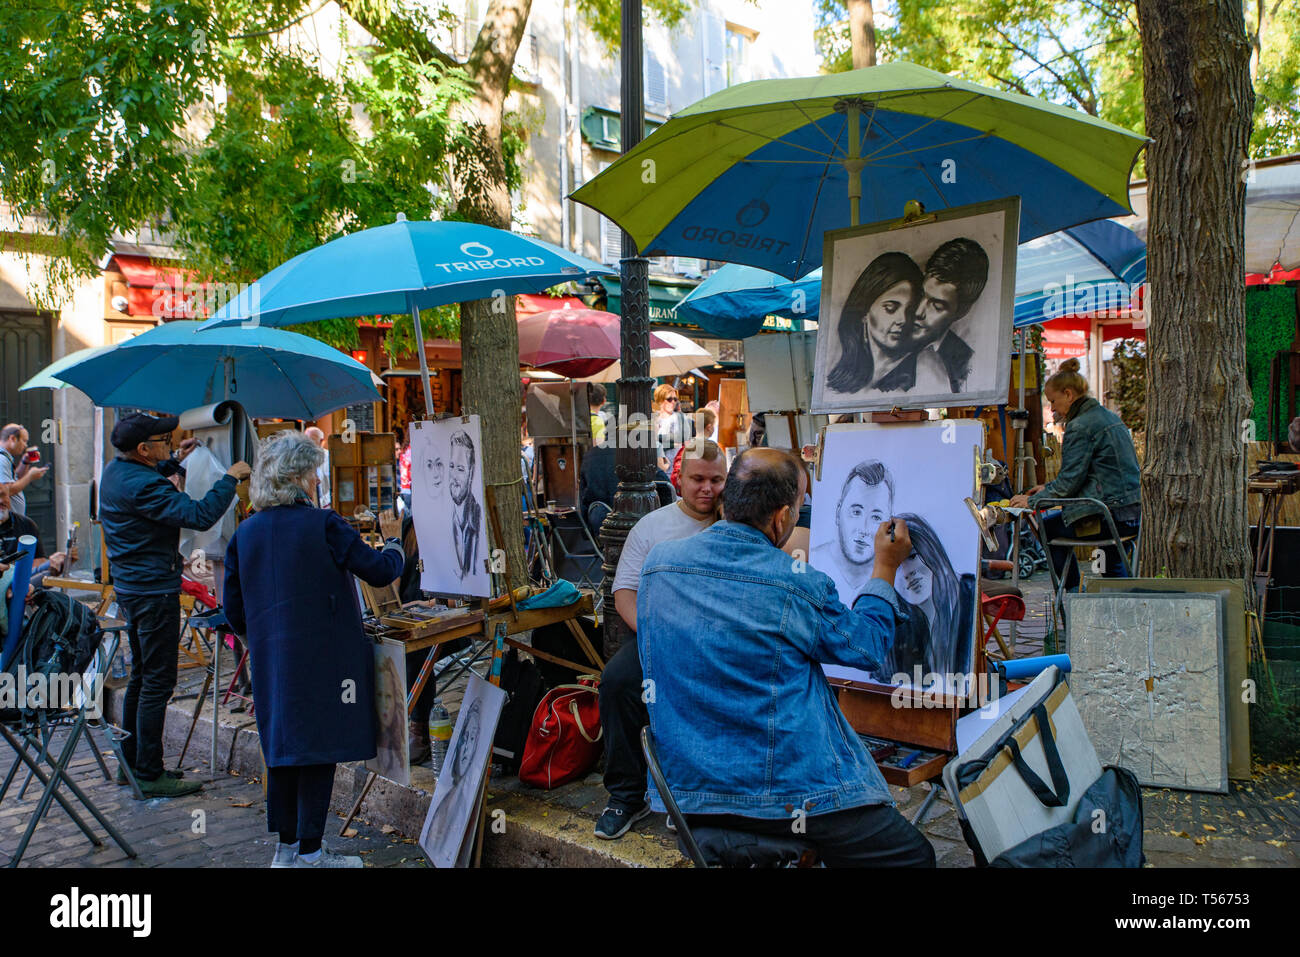 The square of Place du Tertre in Montmartre, famous for artists, painters and portraitists Stock Photo